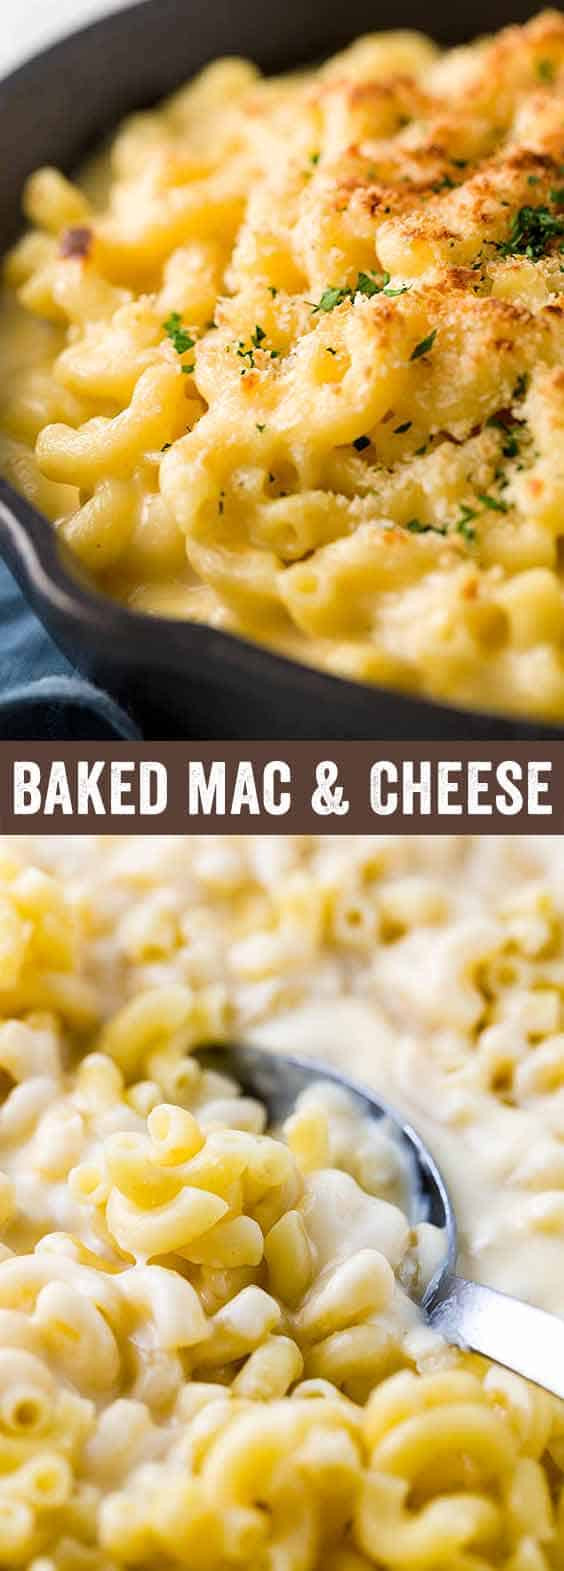 Baked Macaroni And Cheese Recipes With Bread Crumbs
 Baked Macaroni and Cheese with Bread Crumb Topping